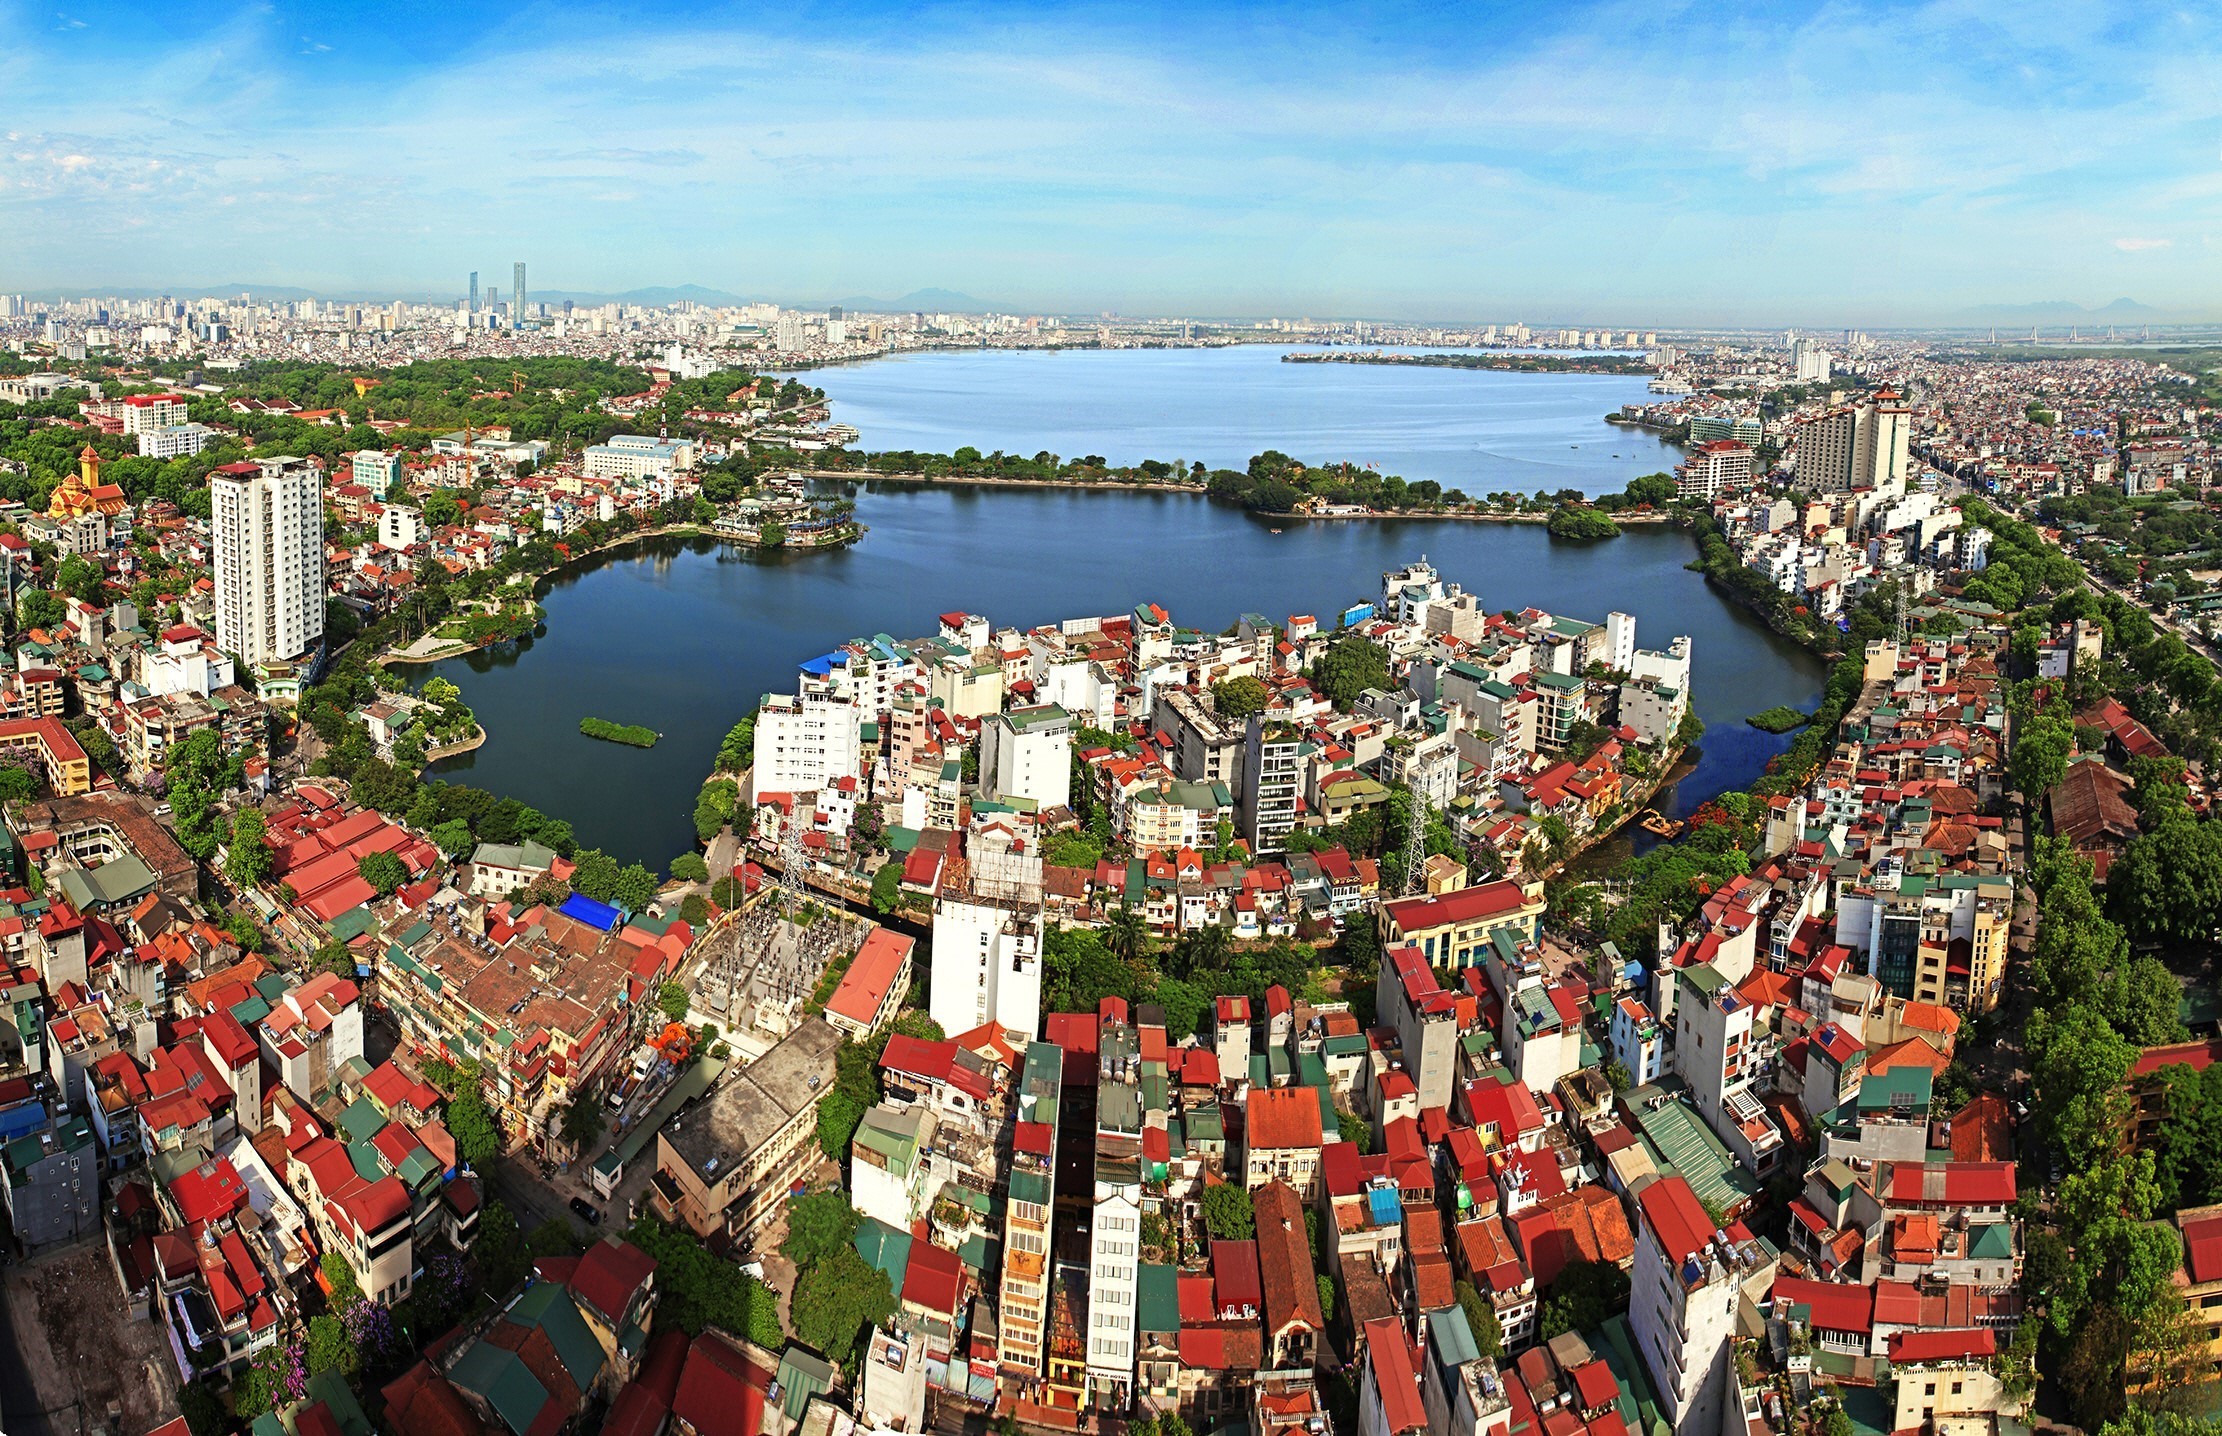 Truc Bach Lake and West Lake have the beauty of a scene of “lakes inside the city”, a typical feature of Hanoi. (Photo: VNA)